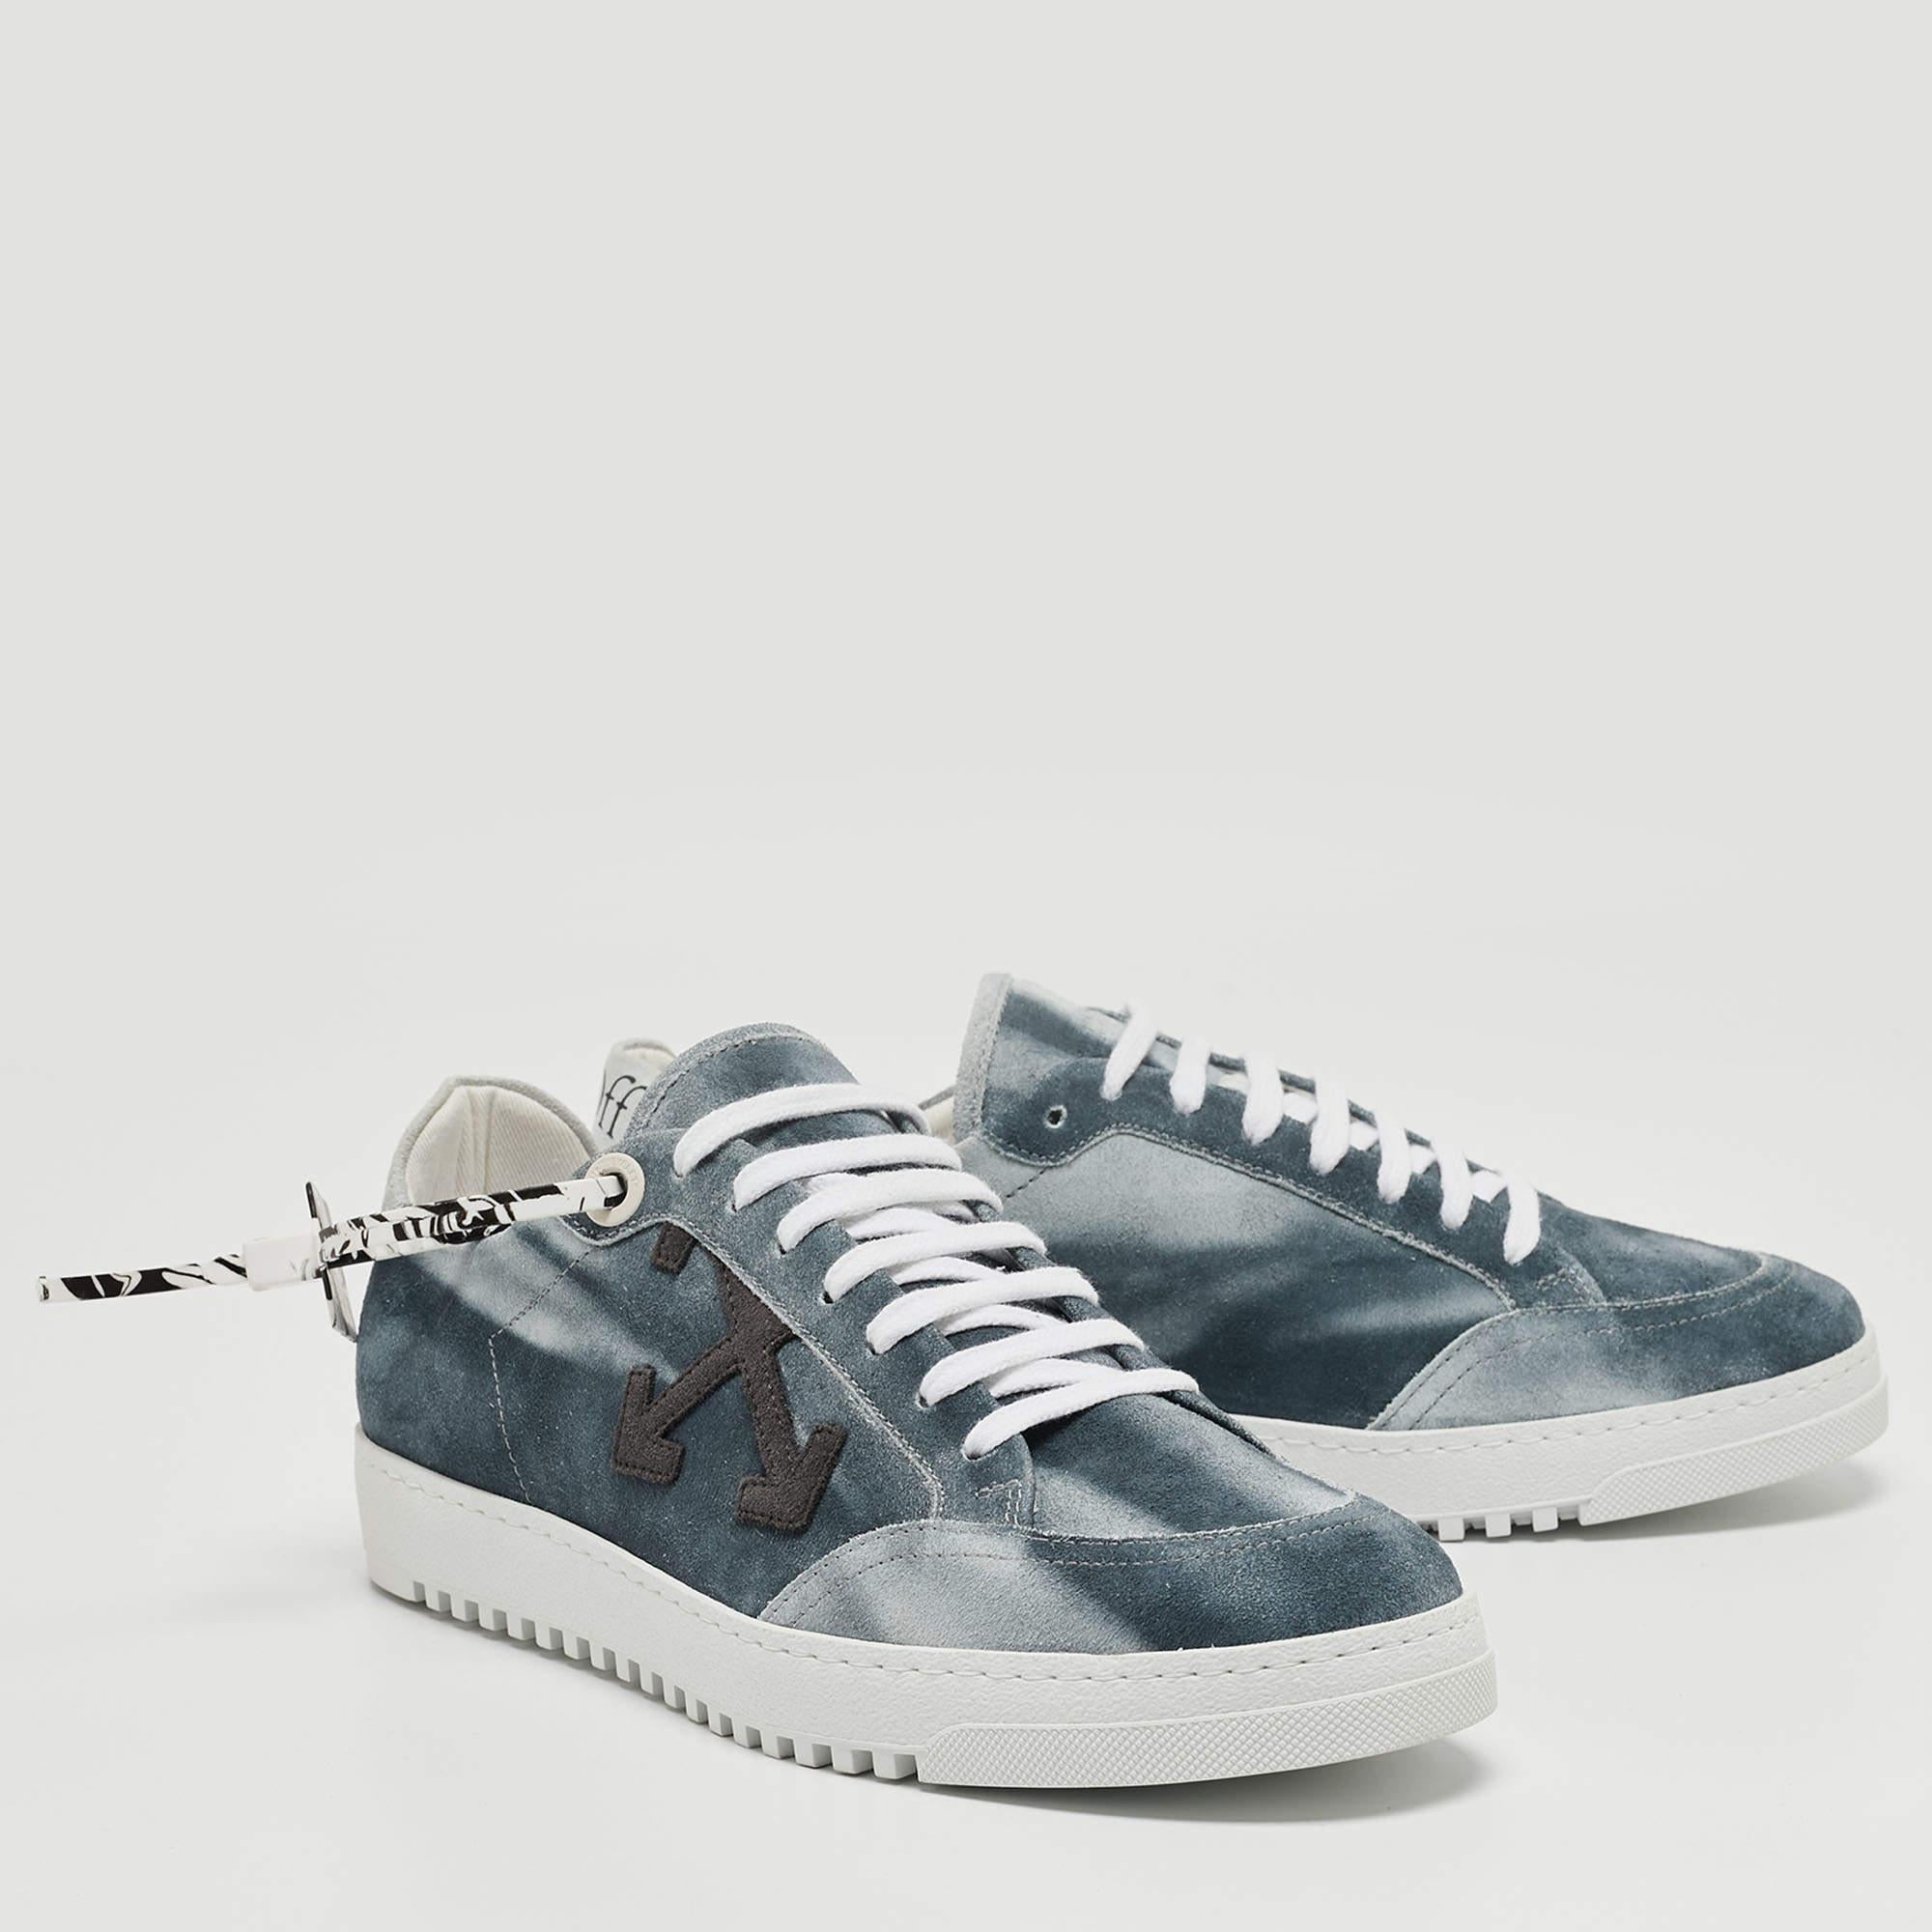 Off-White Blue/Grey Suede 2.0 Low Top Sneakers Size 41 1